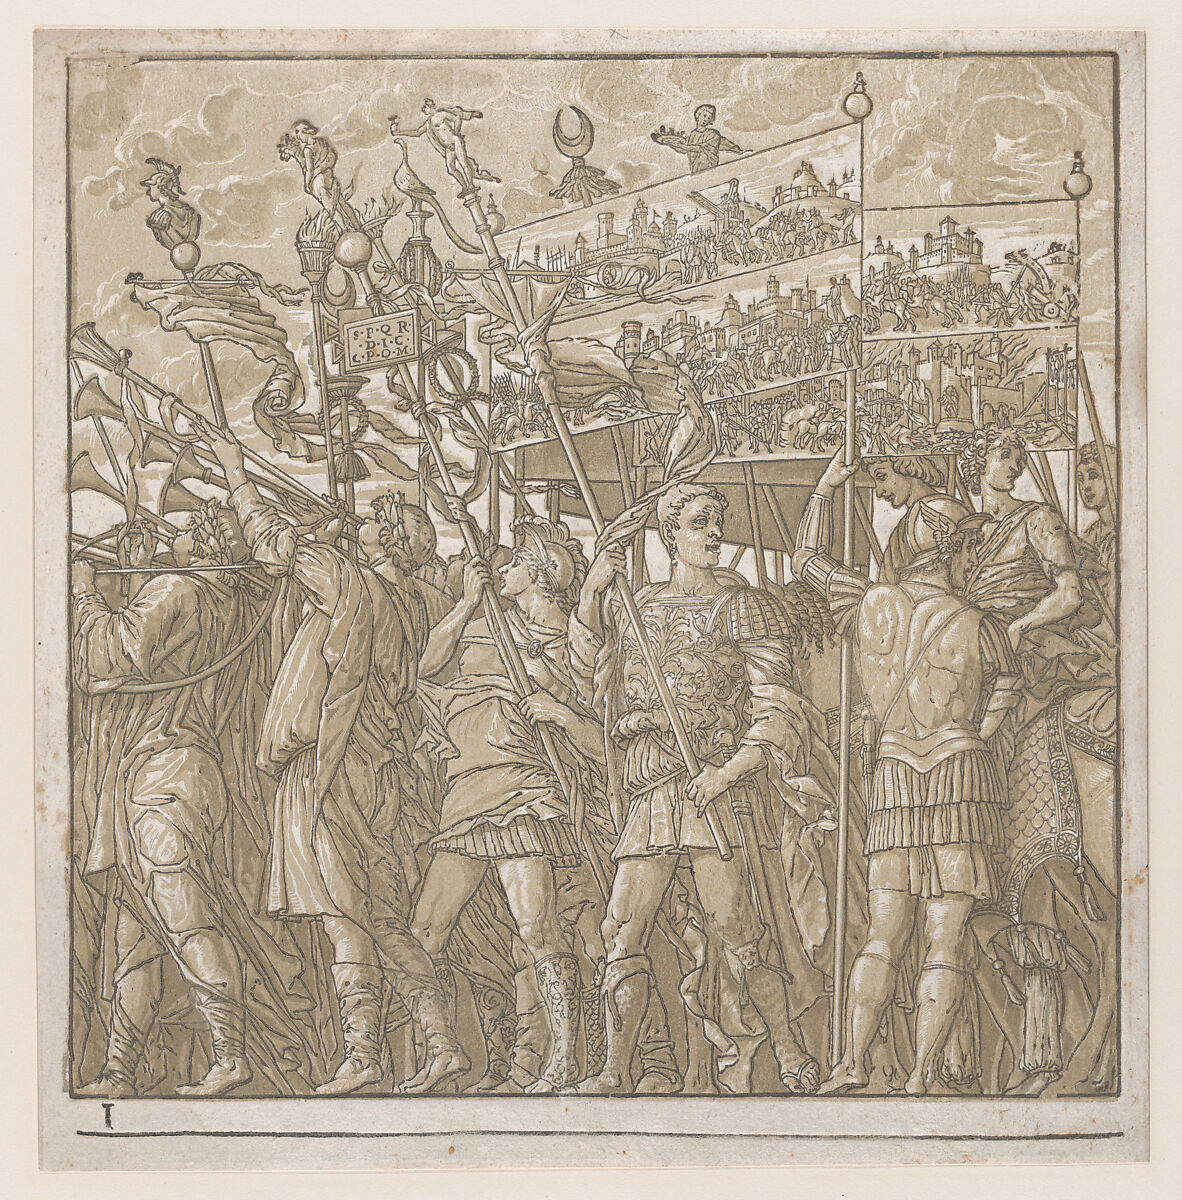 Sheet 1: Soldiers carrying banners depicting Julius Caesar's triumphant military exploits, from "The Triumph of Julius Caesar", Andrea Andreani (Italian, Mantua 1558/1559–1629), Chiaroscuro woodcut from two blocks in light brown ink 